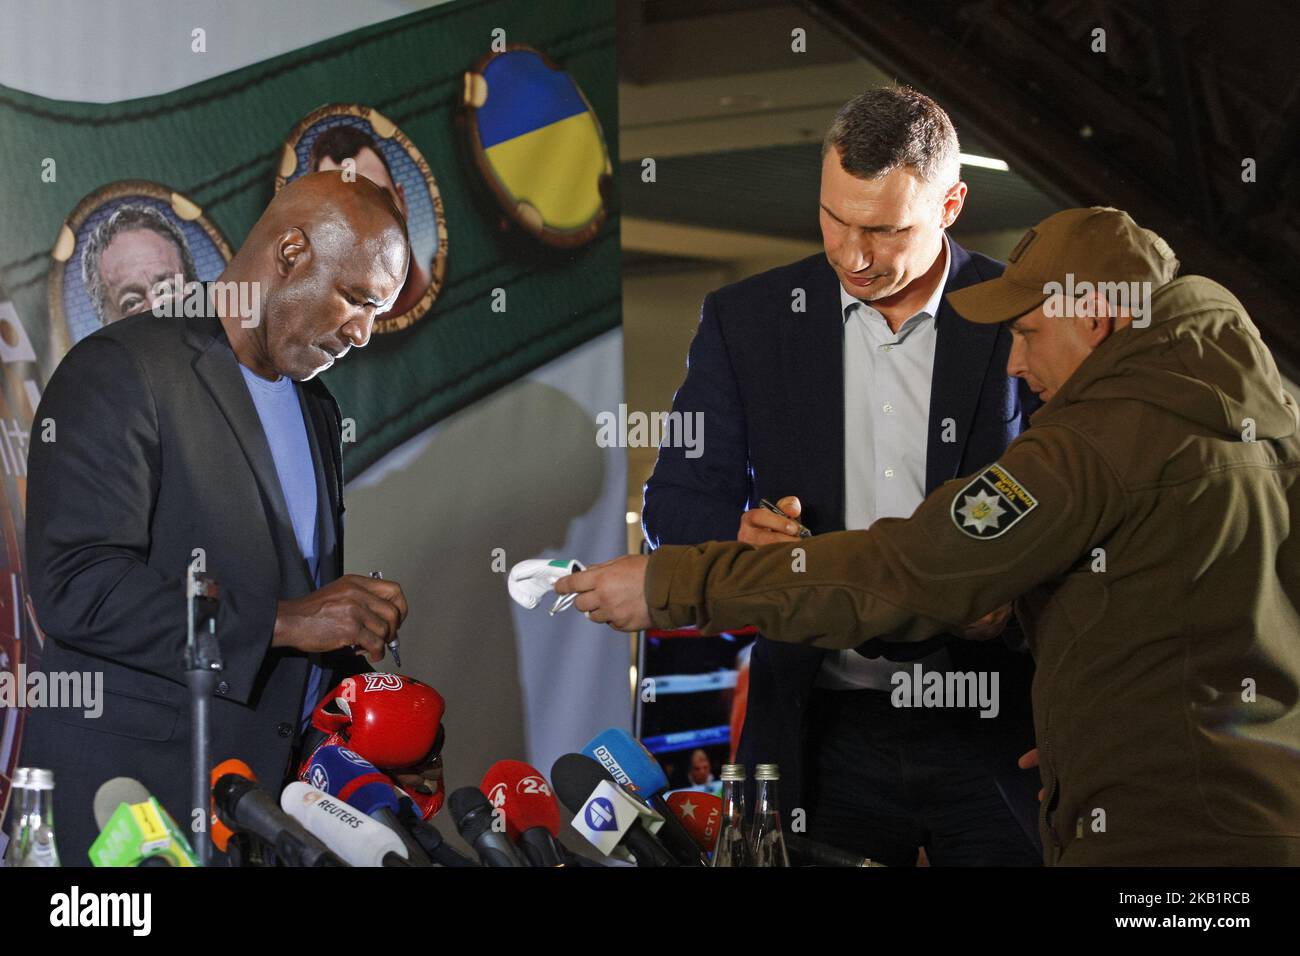 Ex Boxing Champions of the World Evander Holyfield (L) and Kiev's Mayor and former heavyweight boxing champion Vitali Klitschko (C) gives signatures during an authographs signing event on the 56th WBC ( World Boxing Council ) Convention in Kiev, Ukraine, 02 October, 2018. The 56th WBC Convention takes place in Kiev from September 30 to October 05. The event participate of boxing legends Lennox Lewis, Evander Holyfield, Eric Morales, Alexander Usik, Vitali Klitschko and about 700 congress participants from 160 countries. (Photo by NurPhoto) Stock Photo